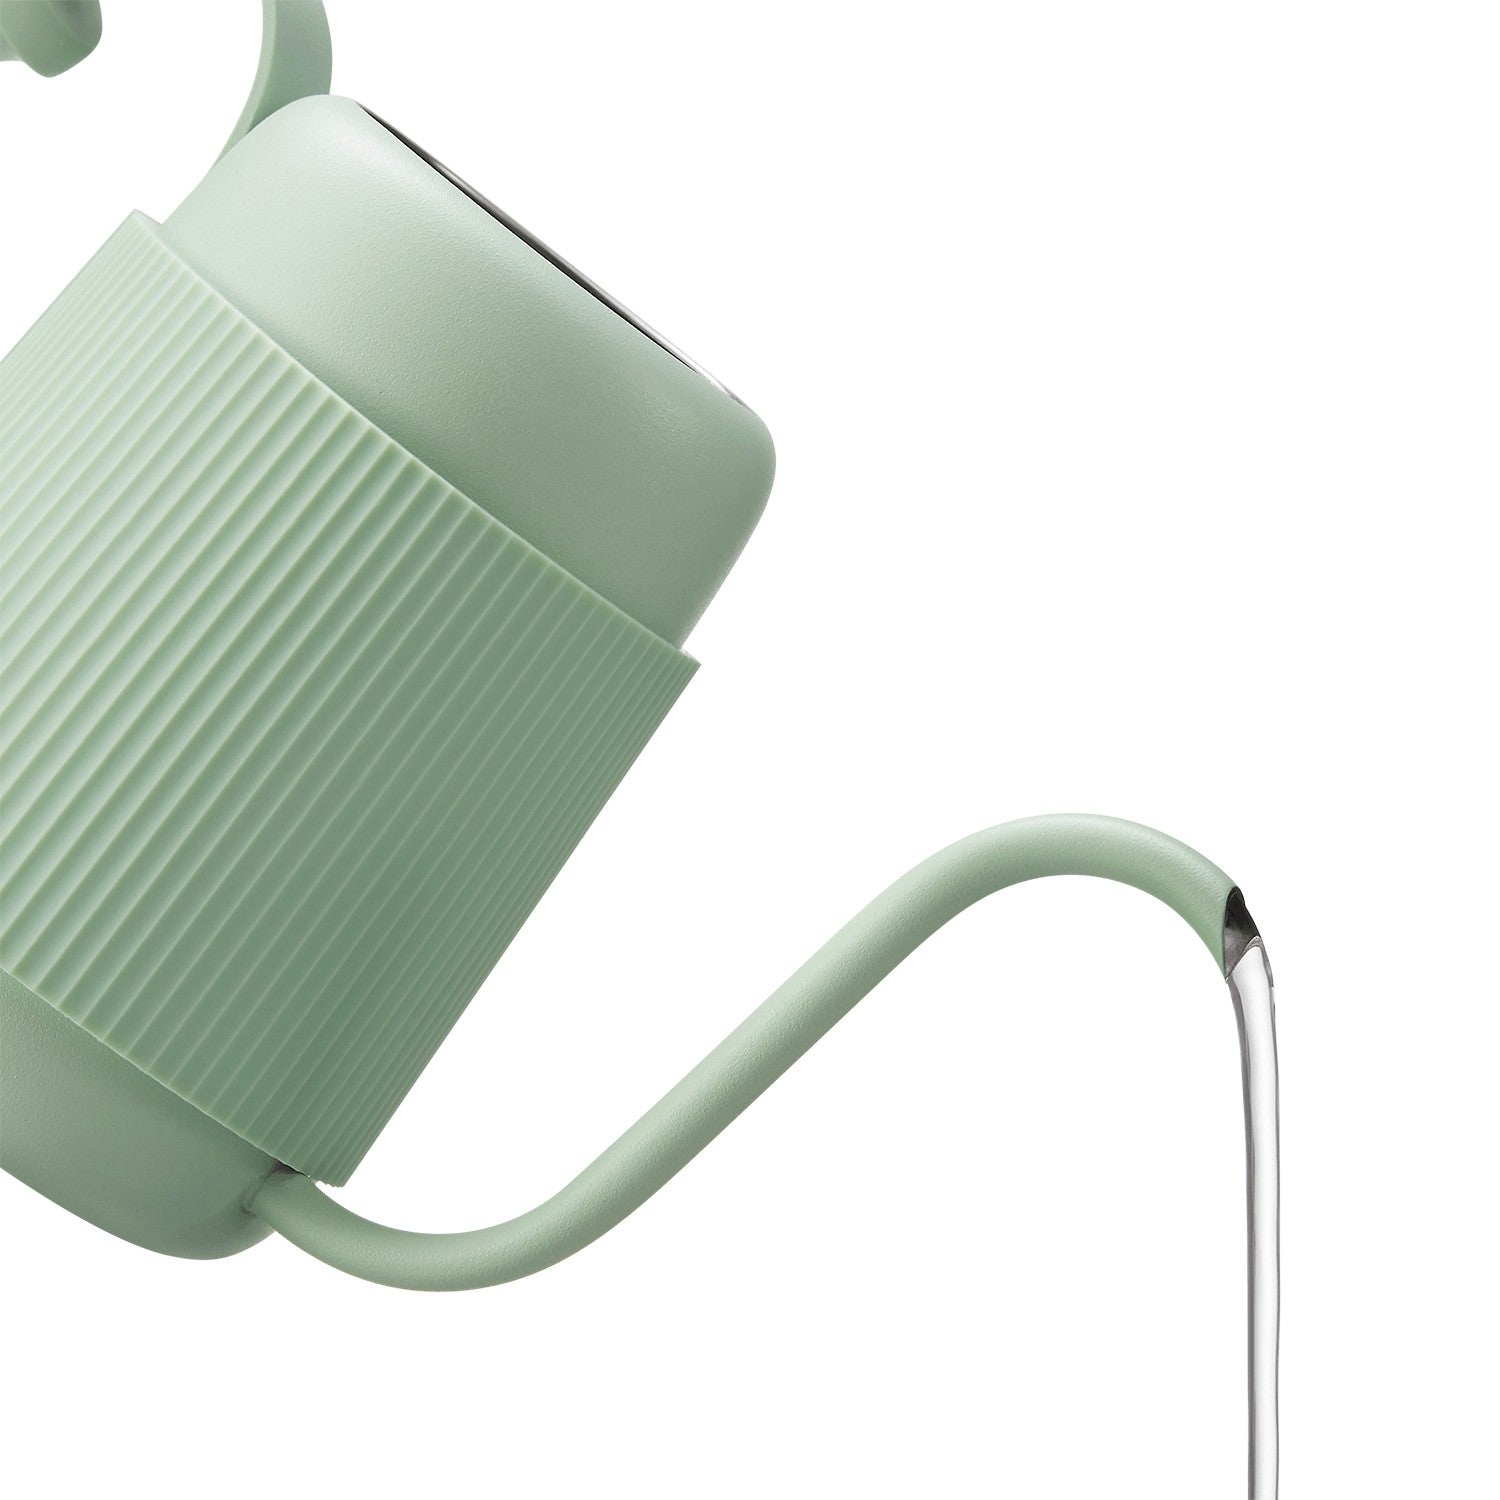 Buydeem Gooseneck Electric Pour-Over Kettle, Stainless Steel Coffee Tea Kettle with Variable Temperature Control, Mint Green